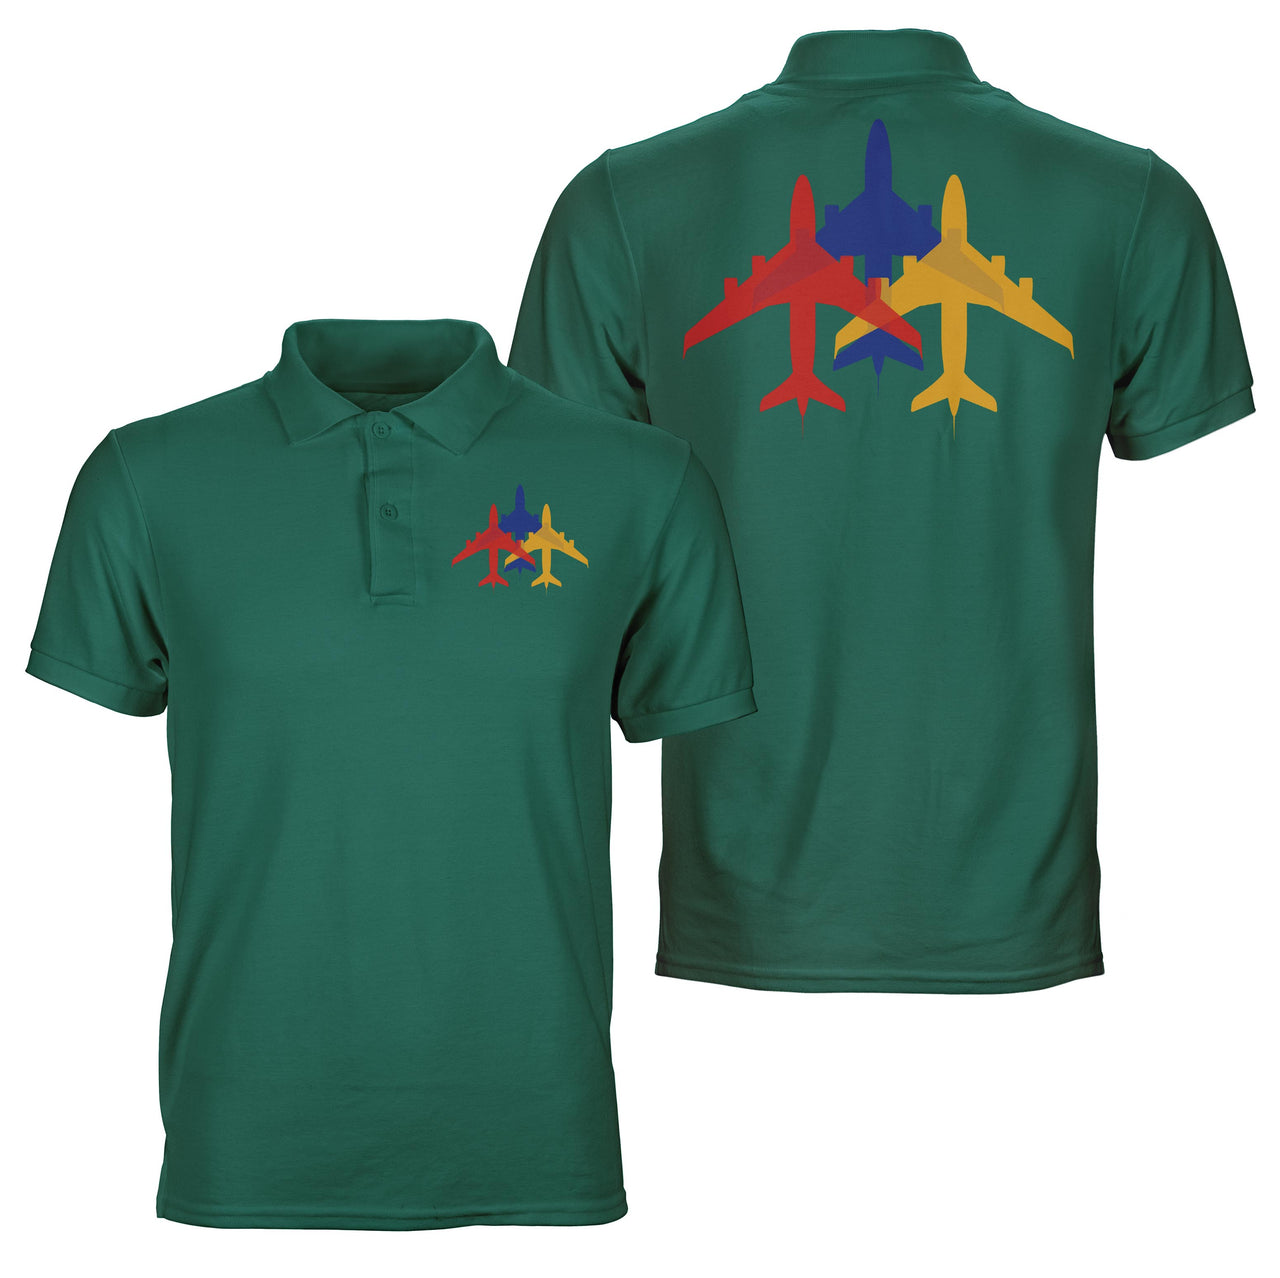 Colourful 3 Airplanes Designed Double Side Polo T-Shirts